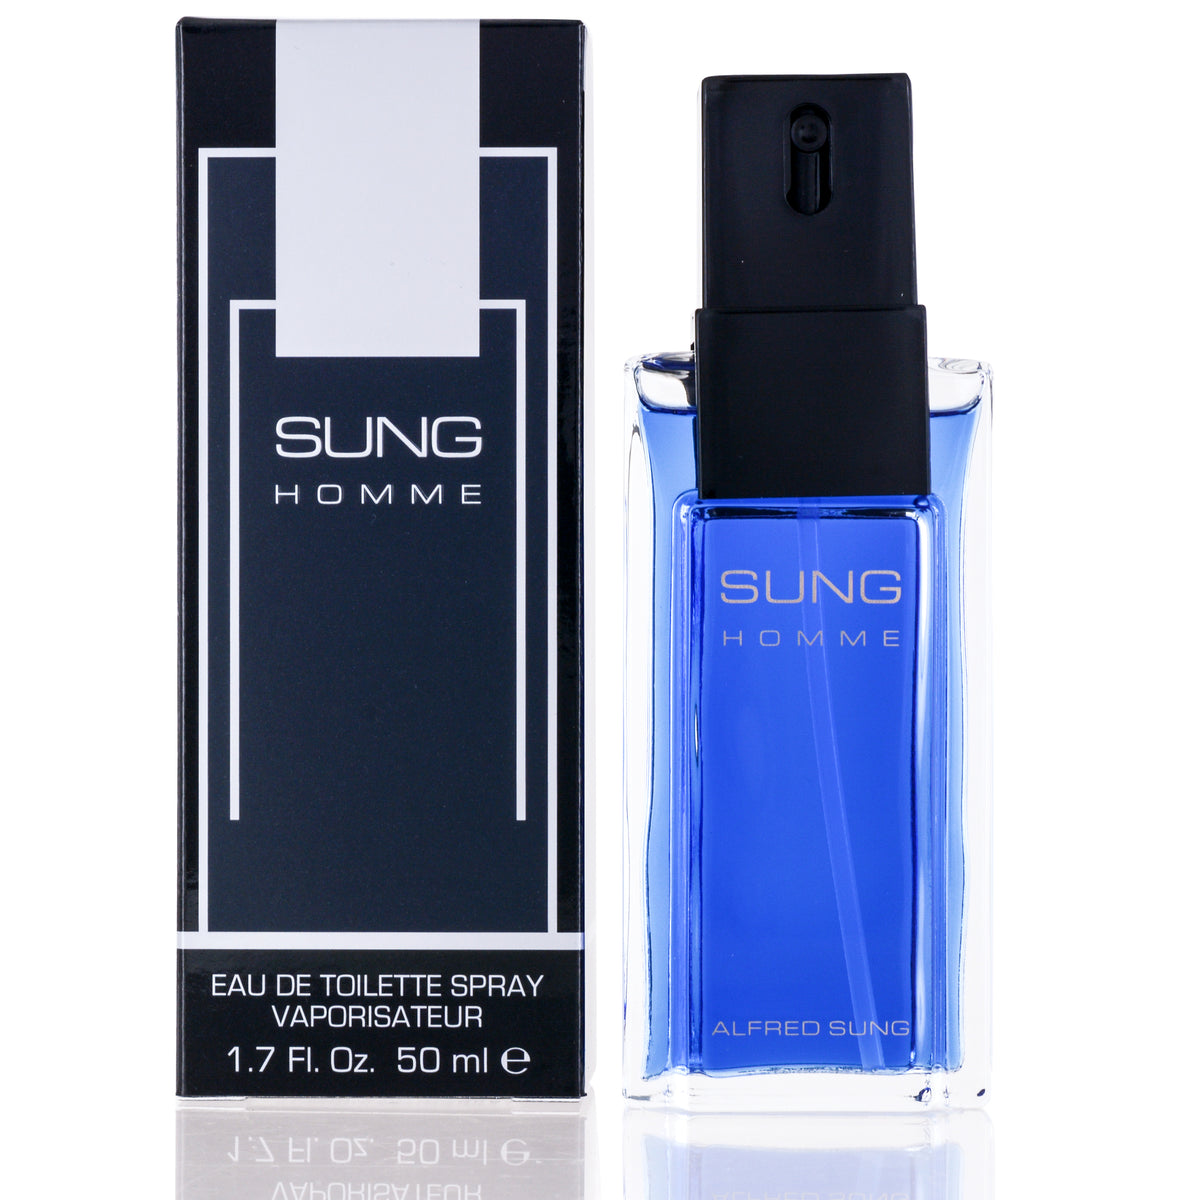 Sung Homme Alfred Sung Edt Spray 1.7 Oz (50 Ml) For Men S7245